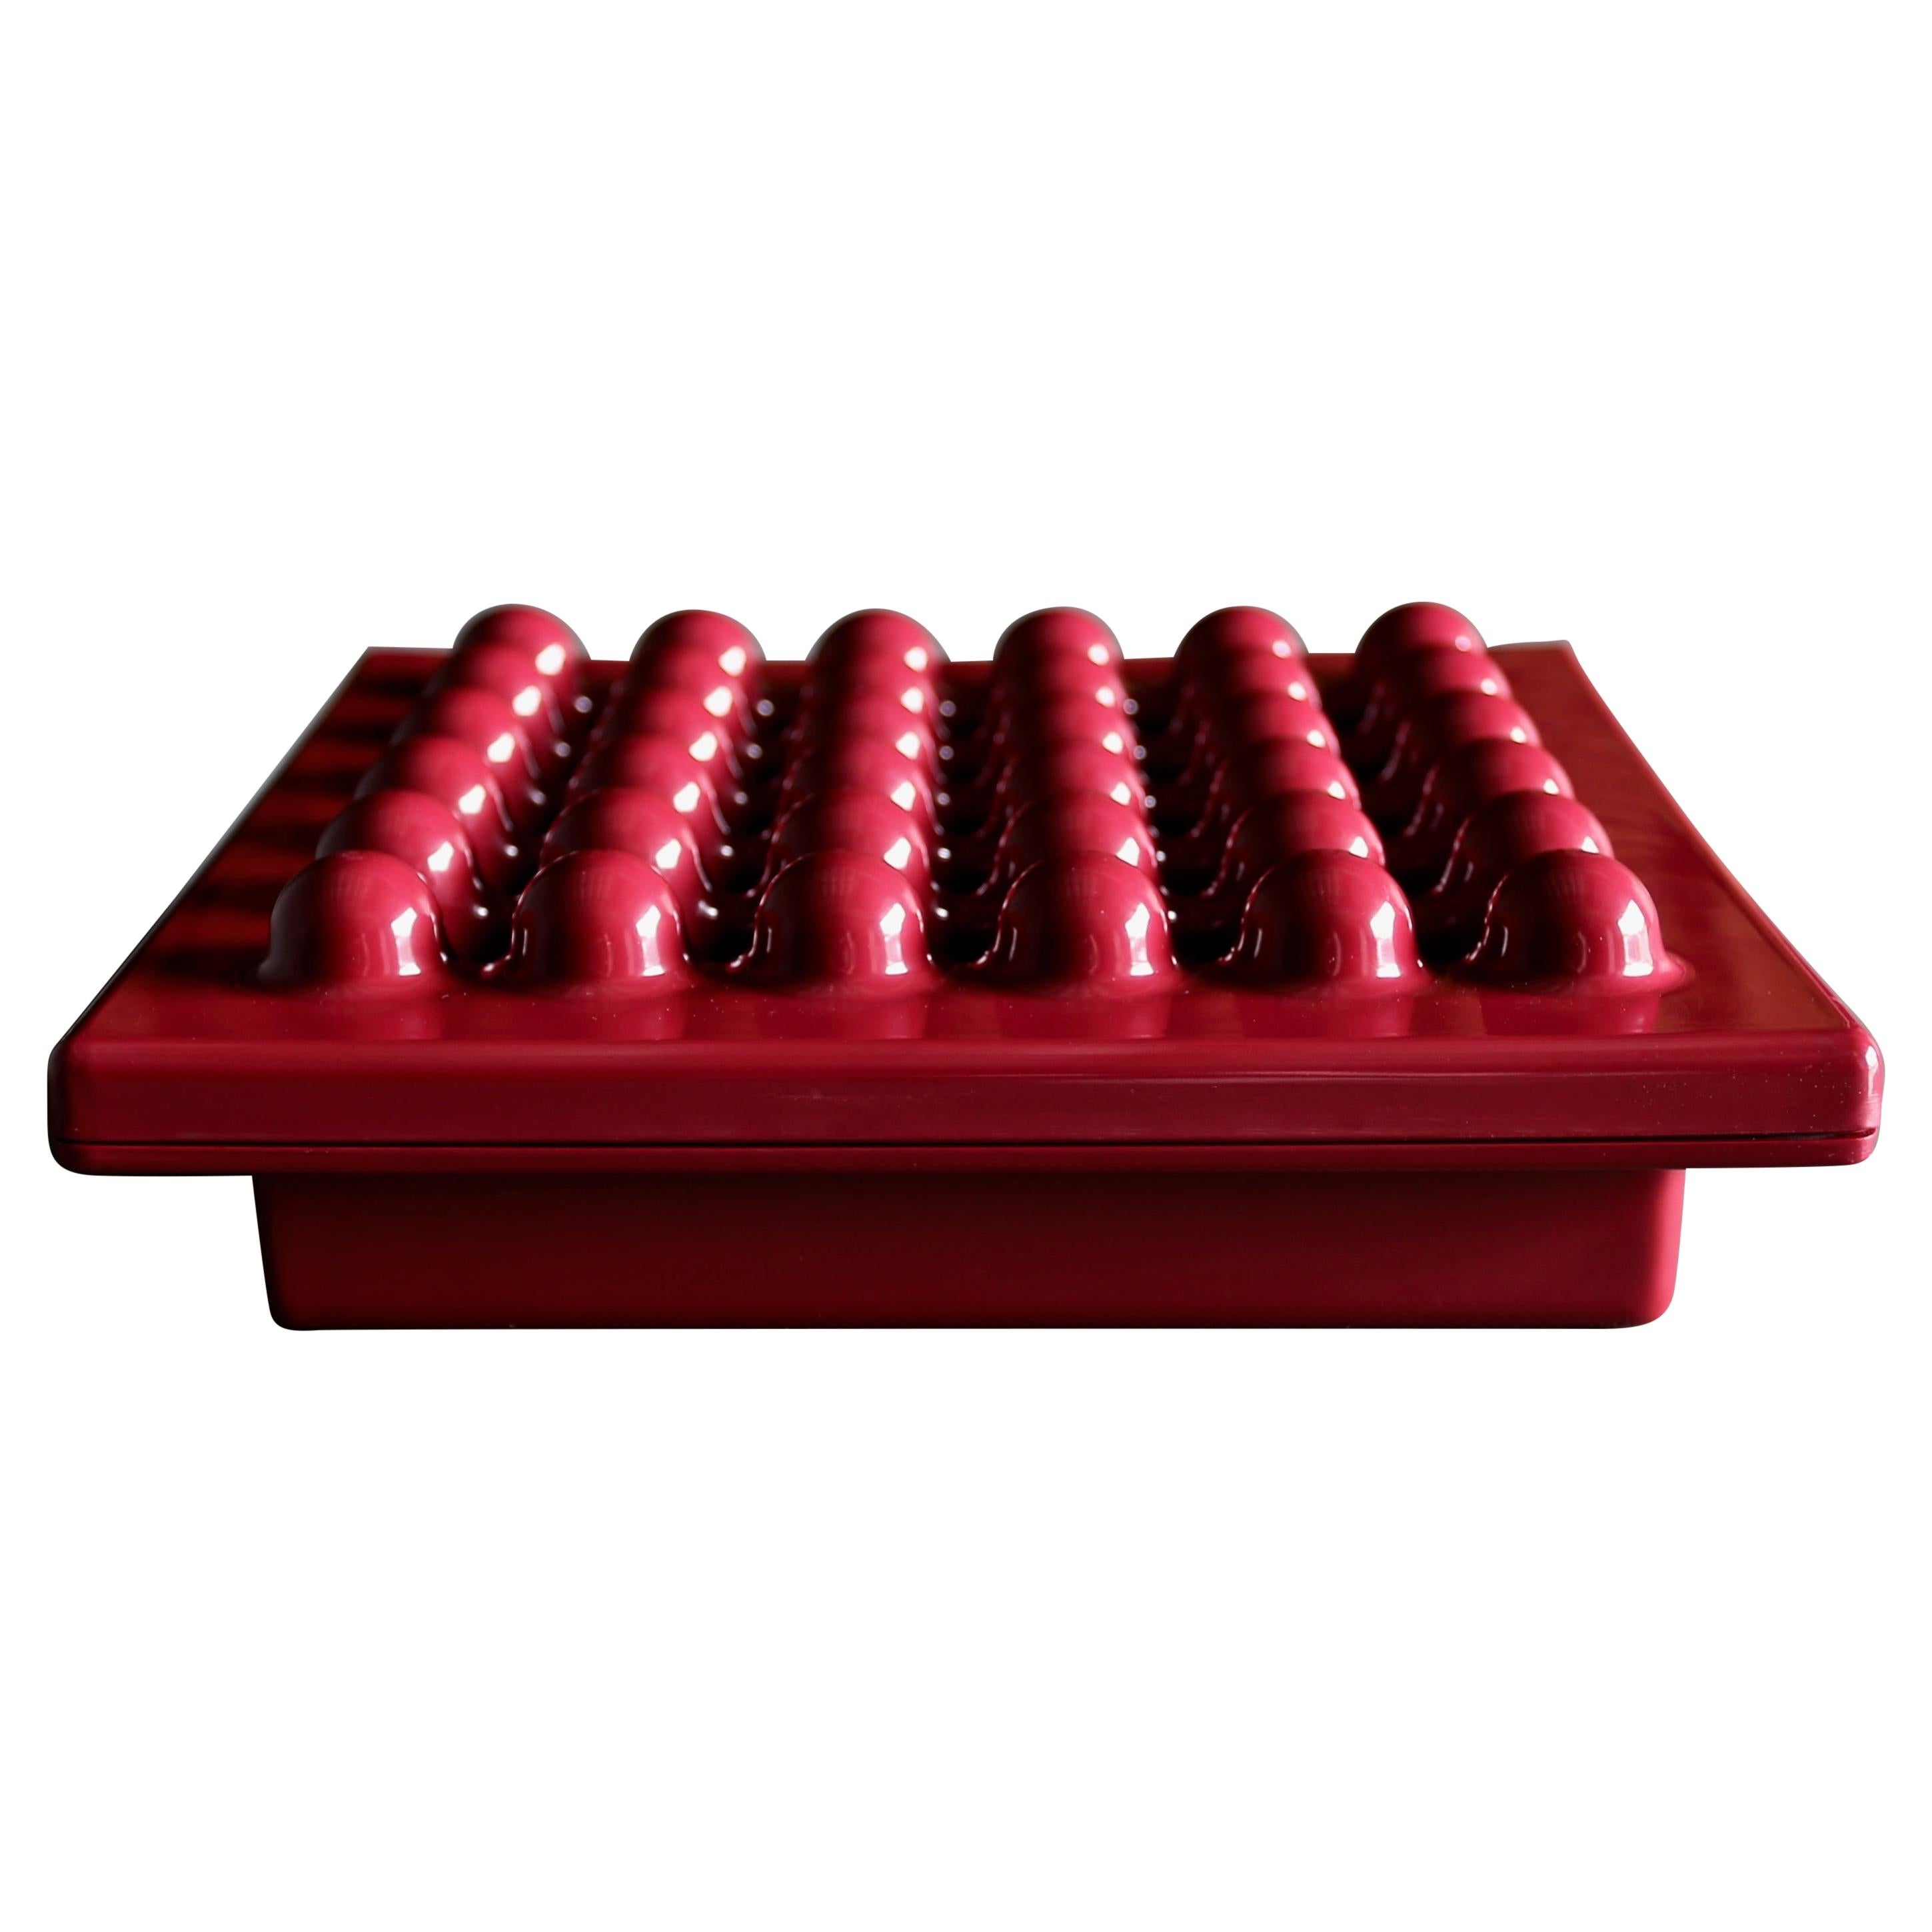 Ettore Sottsass Synthesis Ashtray for Olivetti, circa 1970